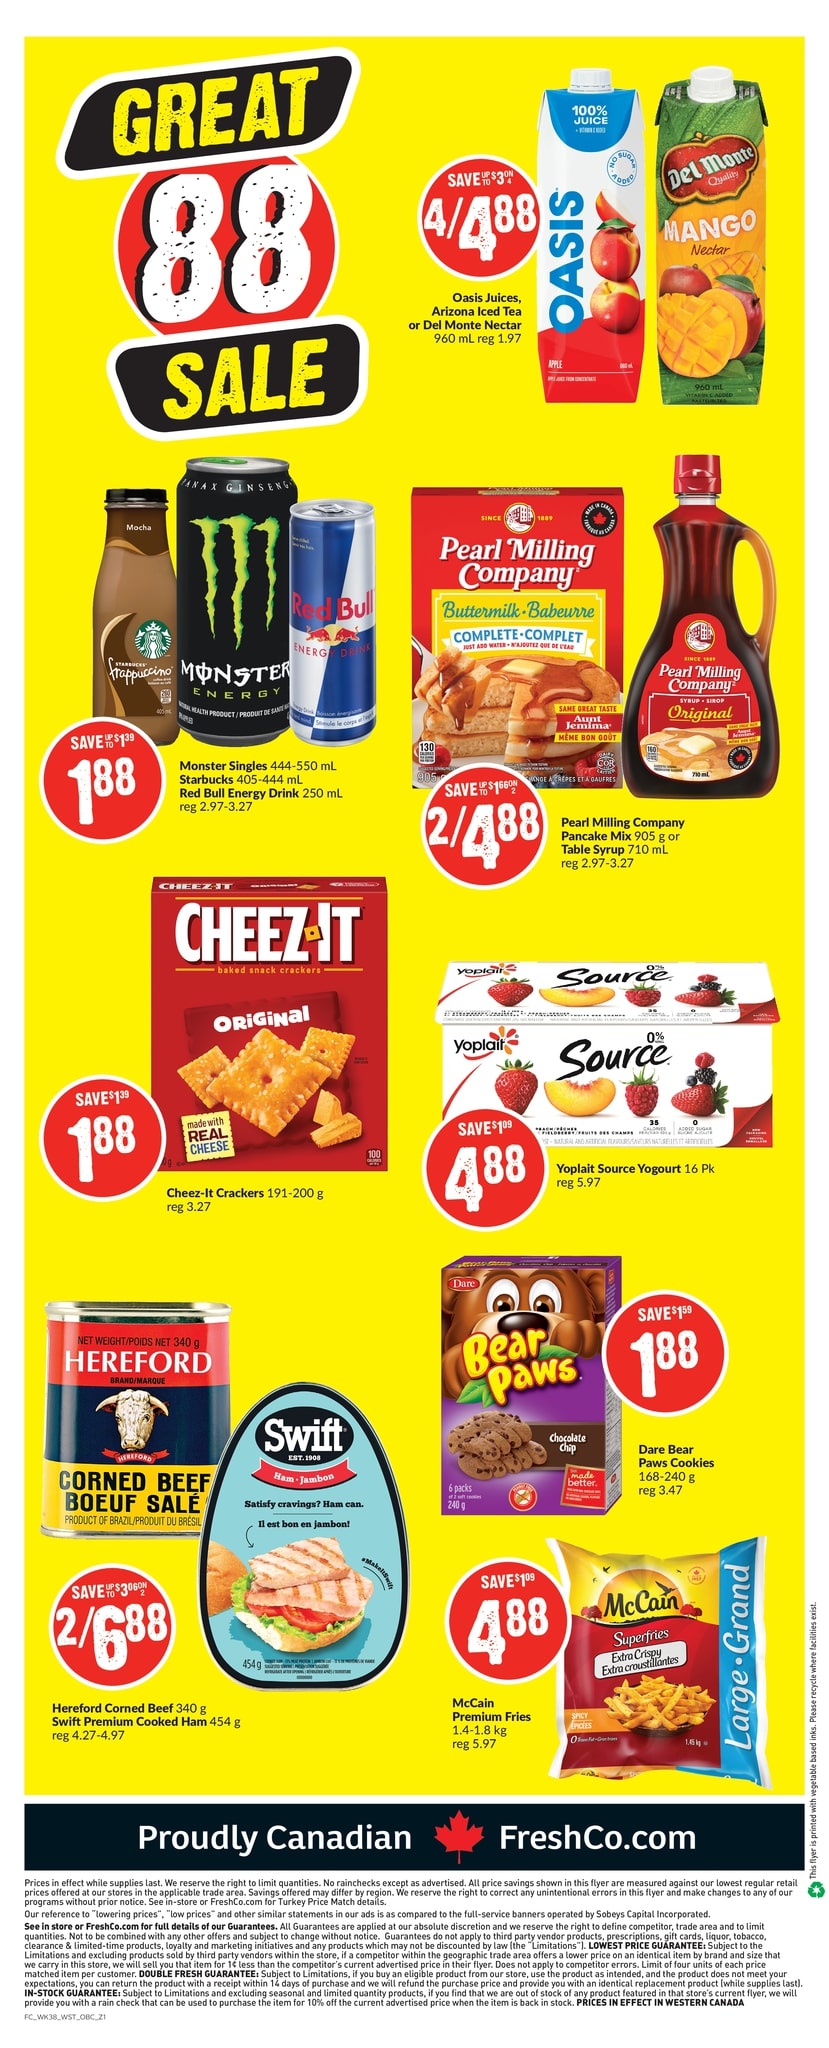 FreshCo British Columbia - Weekly Flyer Specials - Page 9